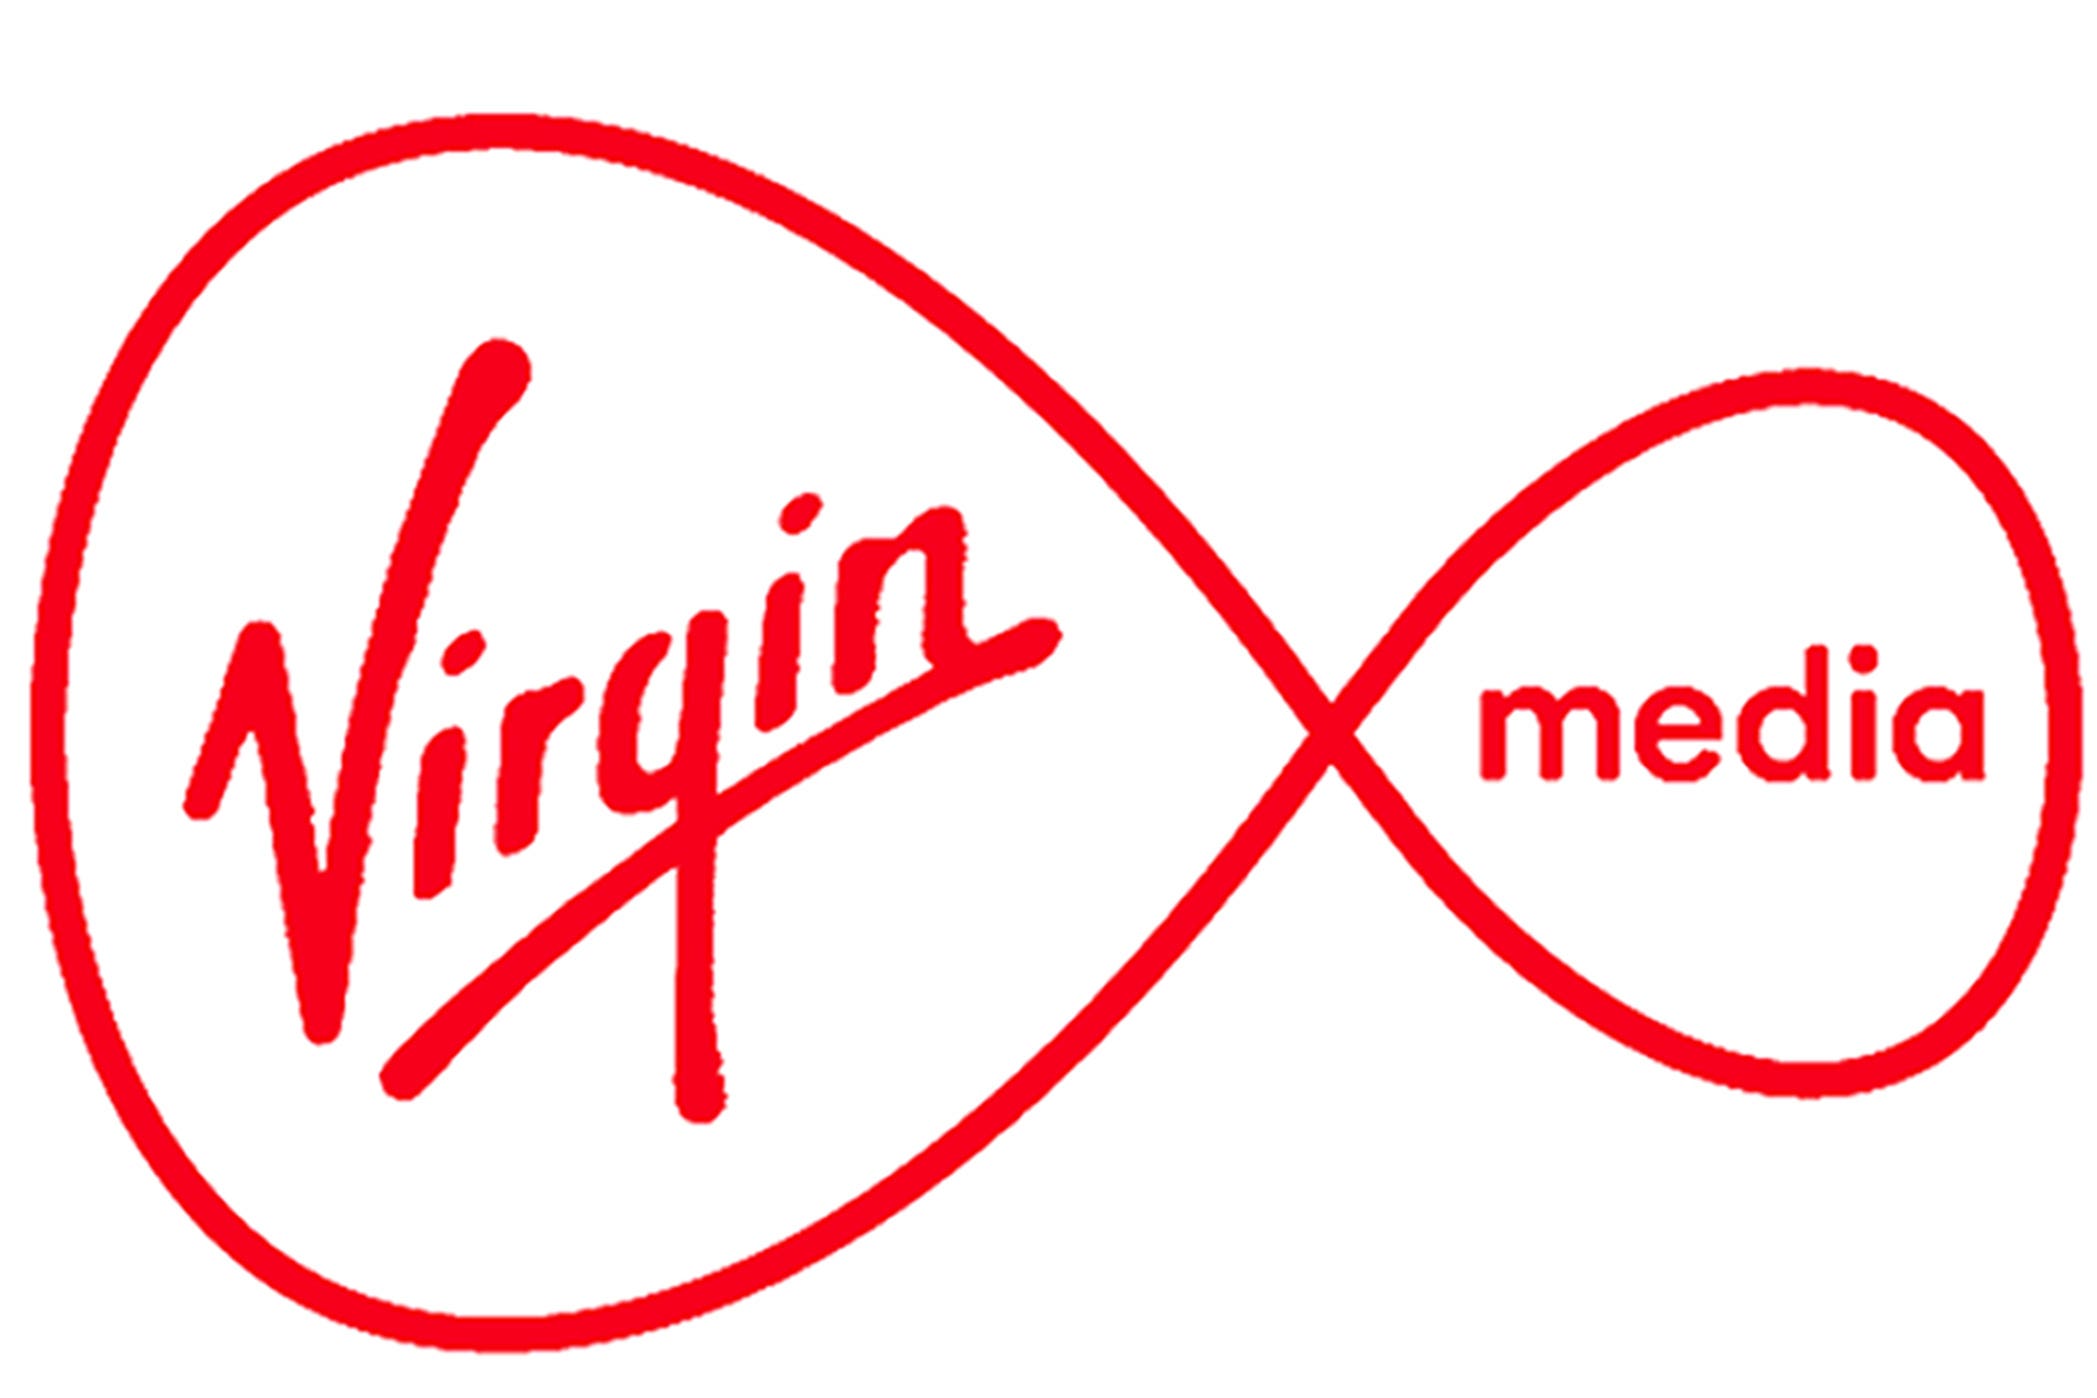 Virgin goes aerial in attempt to bring broadband to the country